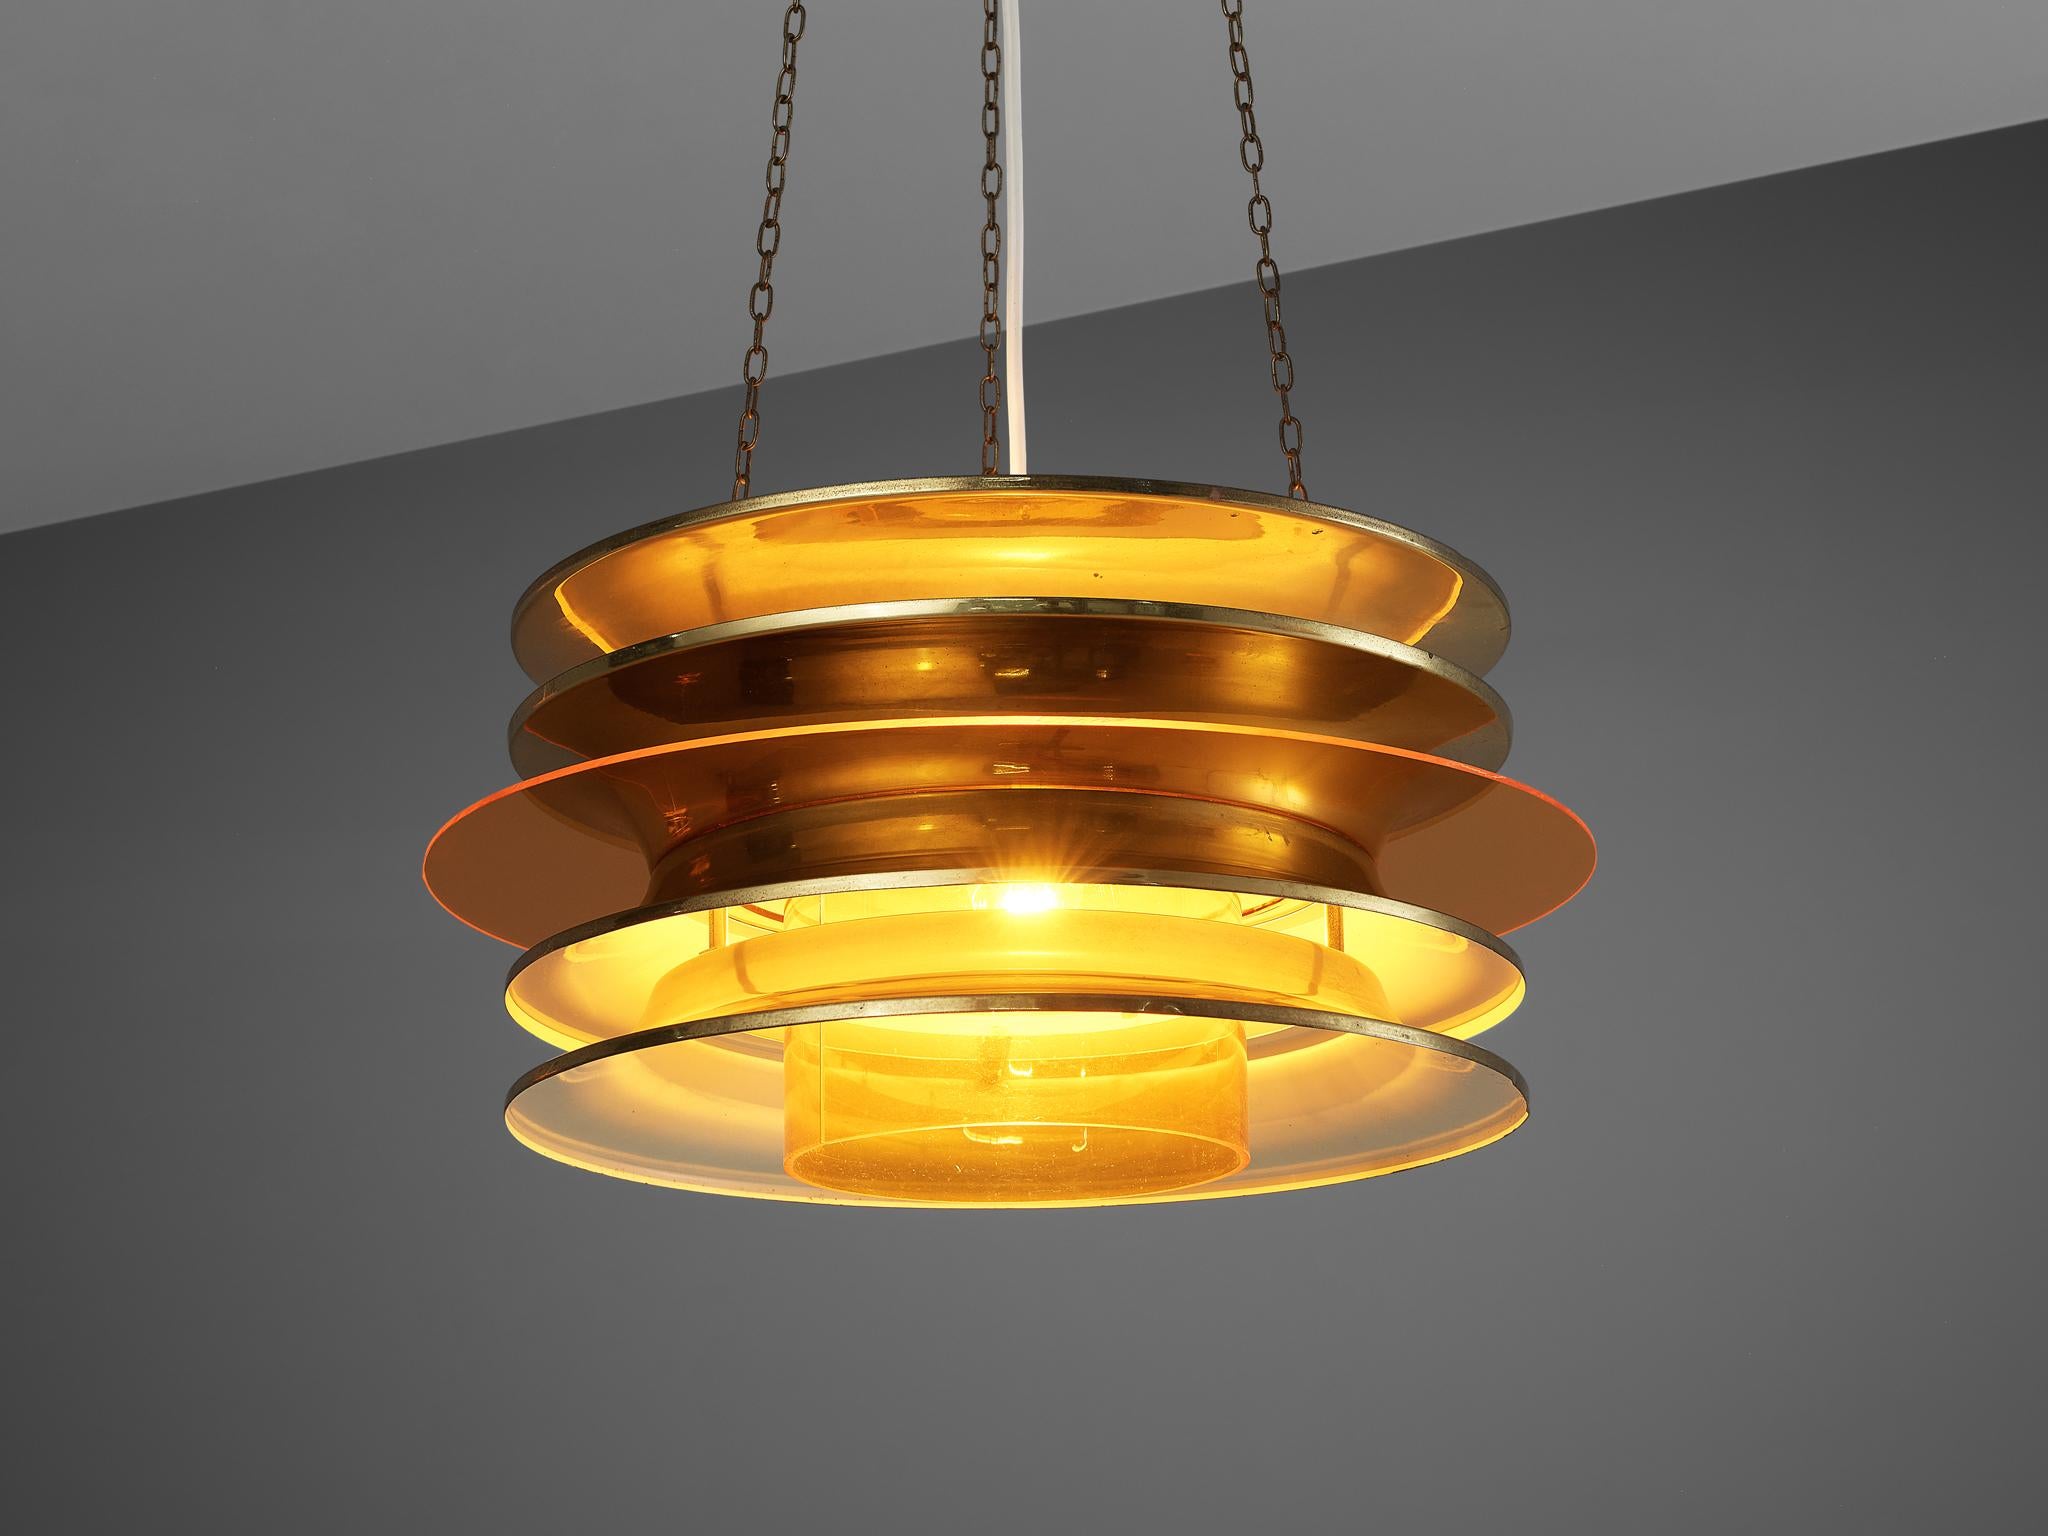 Kai Ruokonen for LYNX, chandelier, brass, orange acrylic, Finland, 1952

Kai Ruokonen is a Finnish designer that mostly works under the artist ‘Kai Finnmark’. This chandelier was designed for the Palace Hotel in Helsinki in 1952 and manufactured by